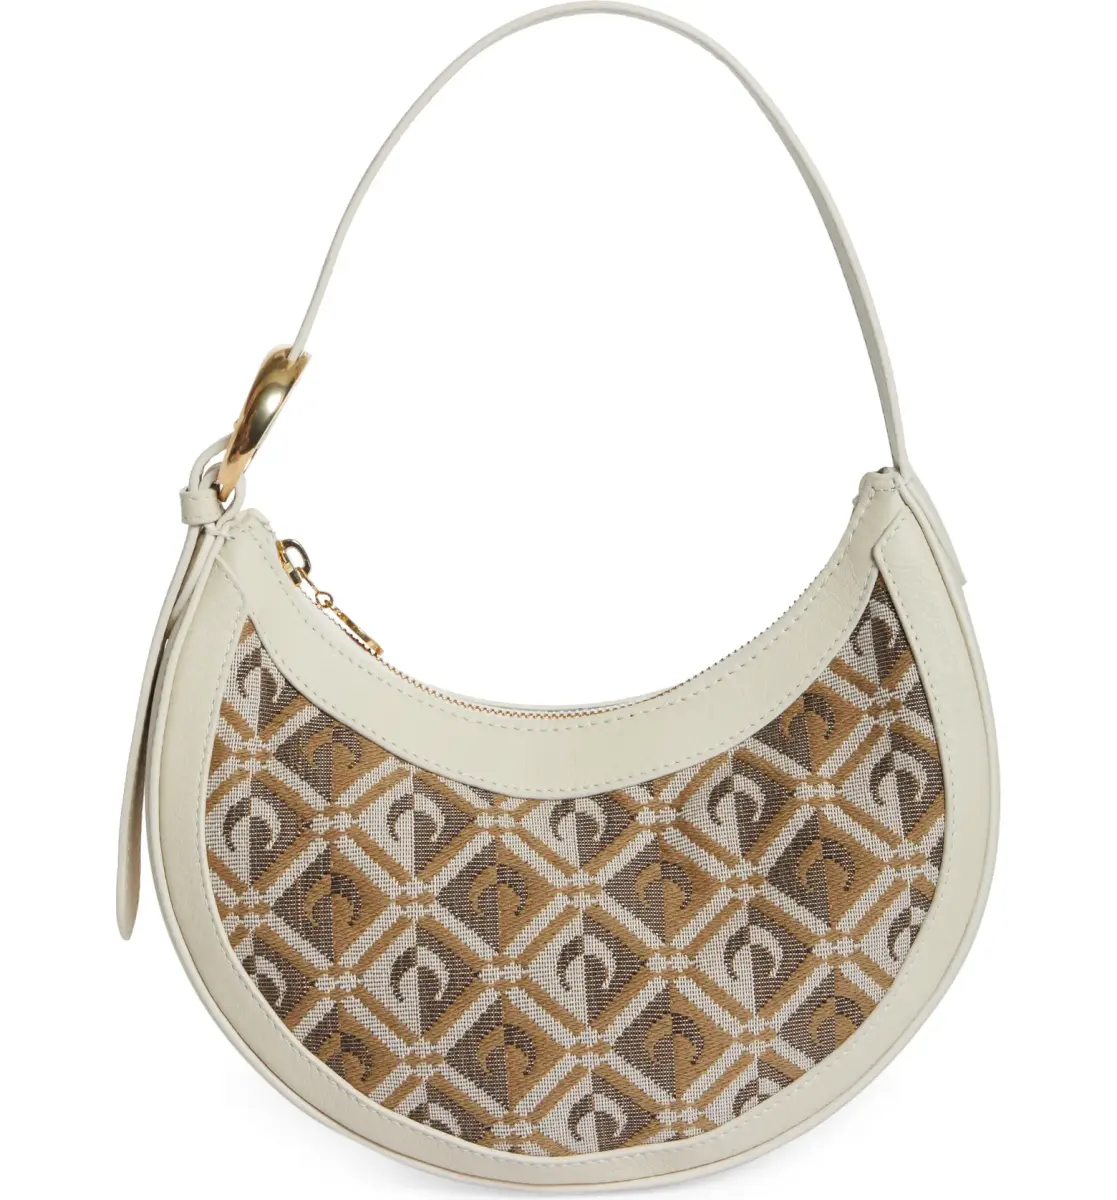 Trend Report: Crescent-Shaped Handbags are On a Roll Pre-fall Season!